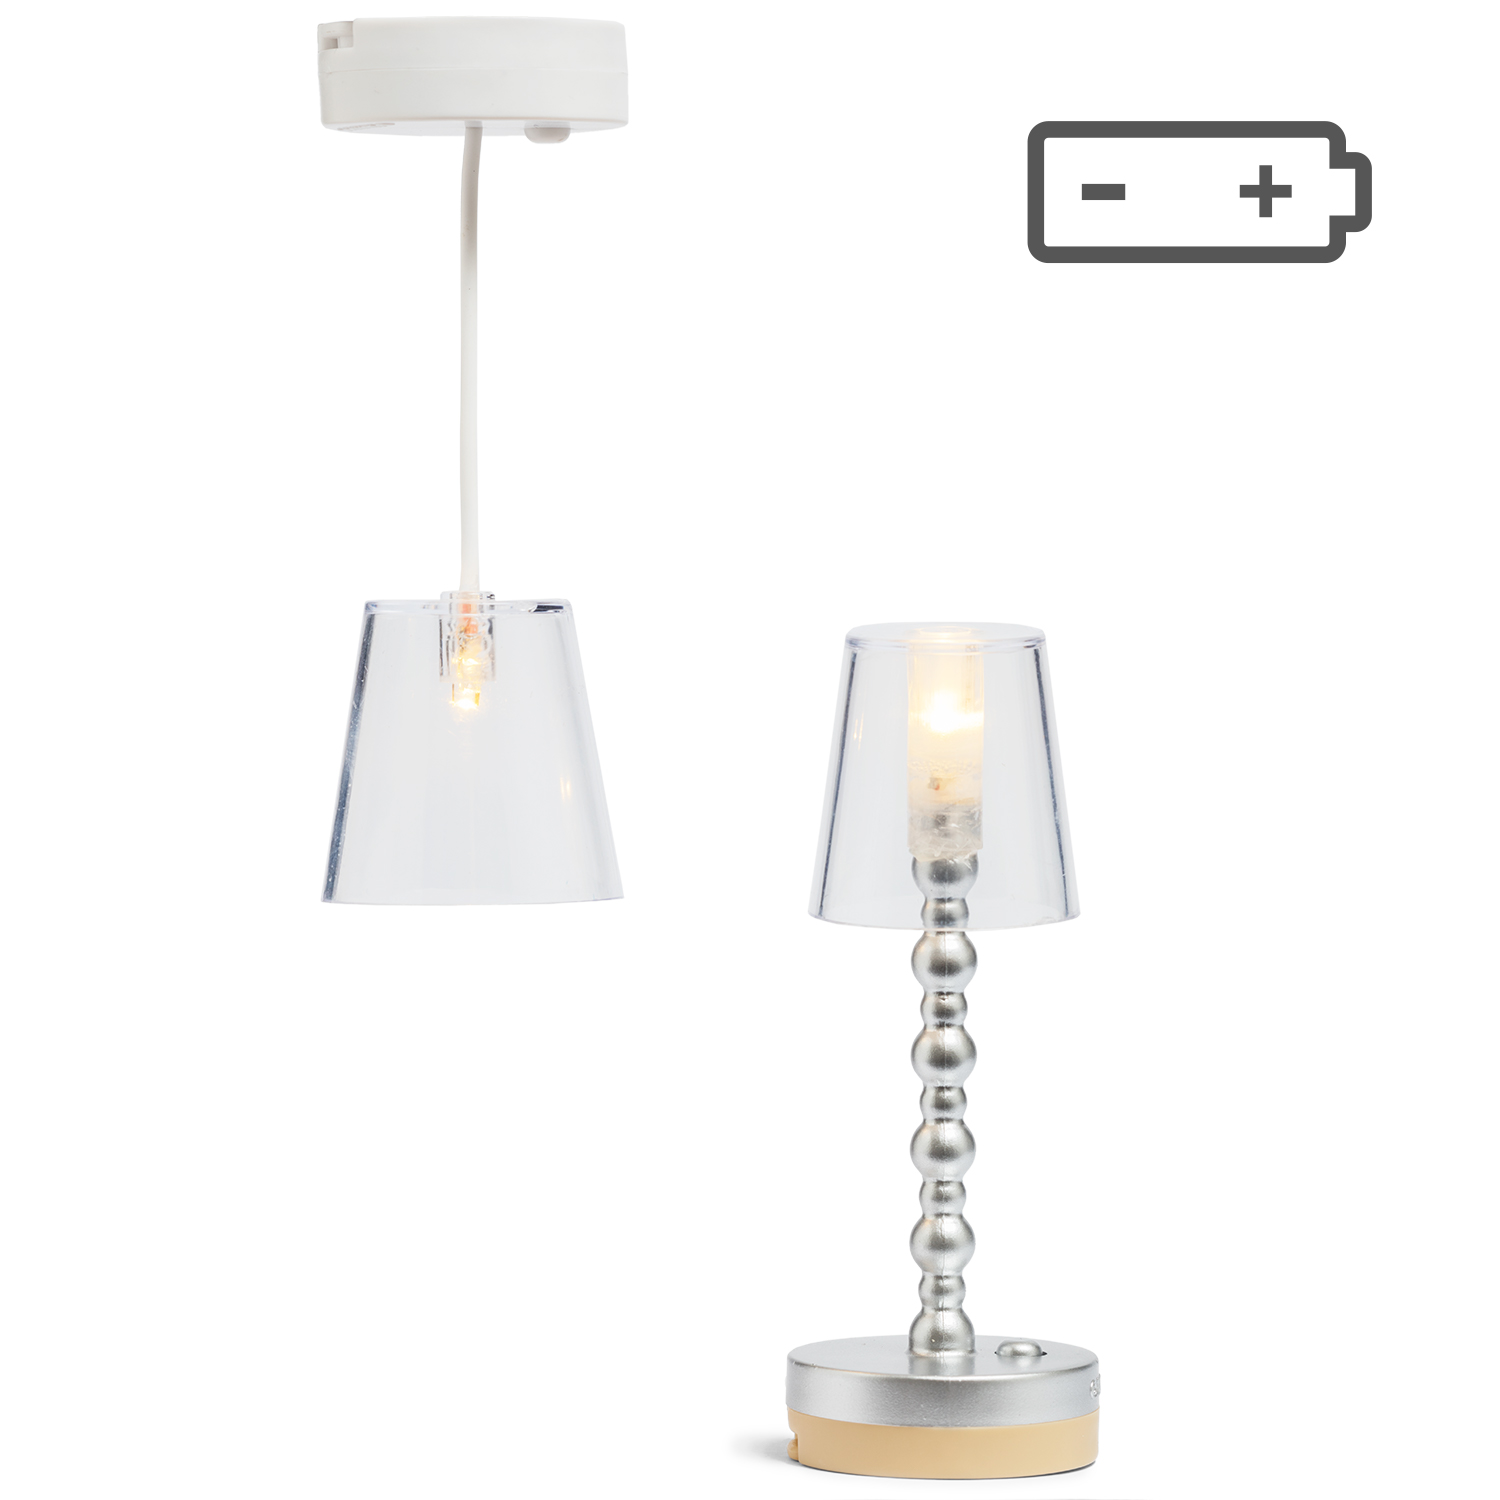 Lundby lundby puppenhausbeleuchtung boden- & dachlampe